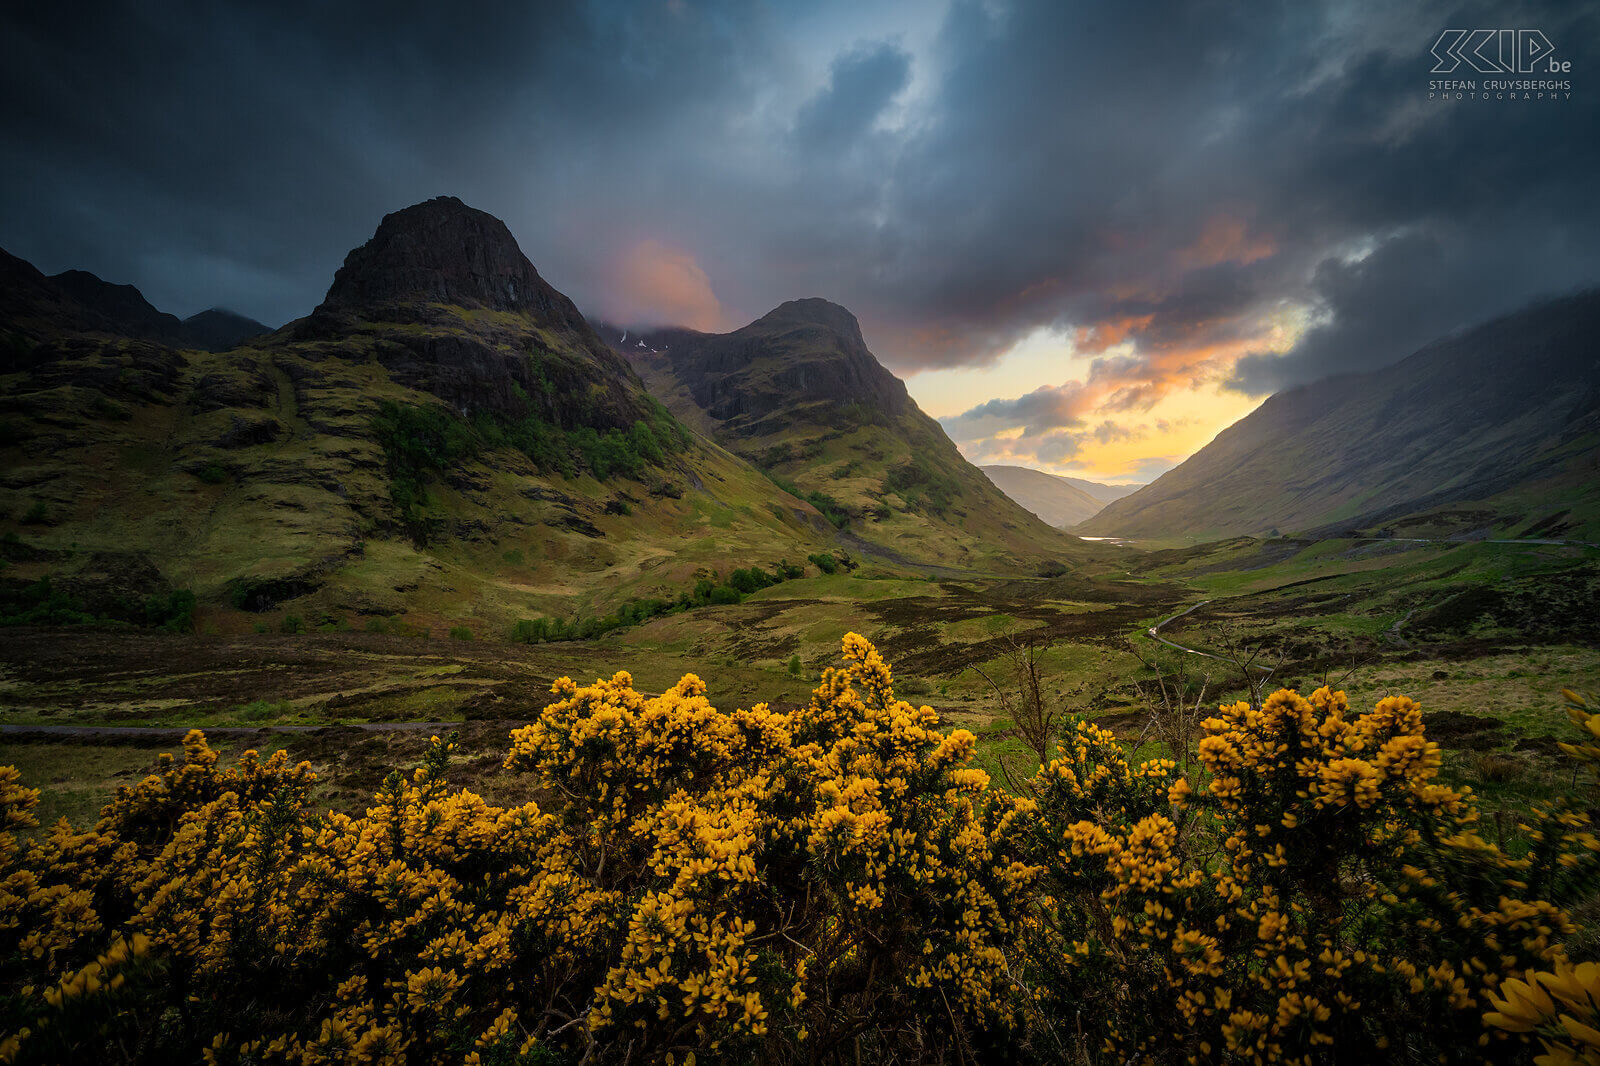 Glen Coe - Three Sisters Sunset with a view on the iconic triumvirate of Beinn Fhada, Gearr Aonach and Aonach Dubh, collectively known as the Three Sisters in the beautiful valley of Glen Coe.  Stefan Cruysberghs